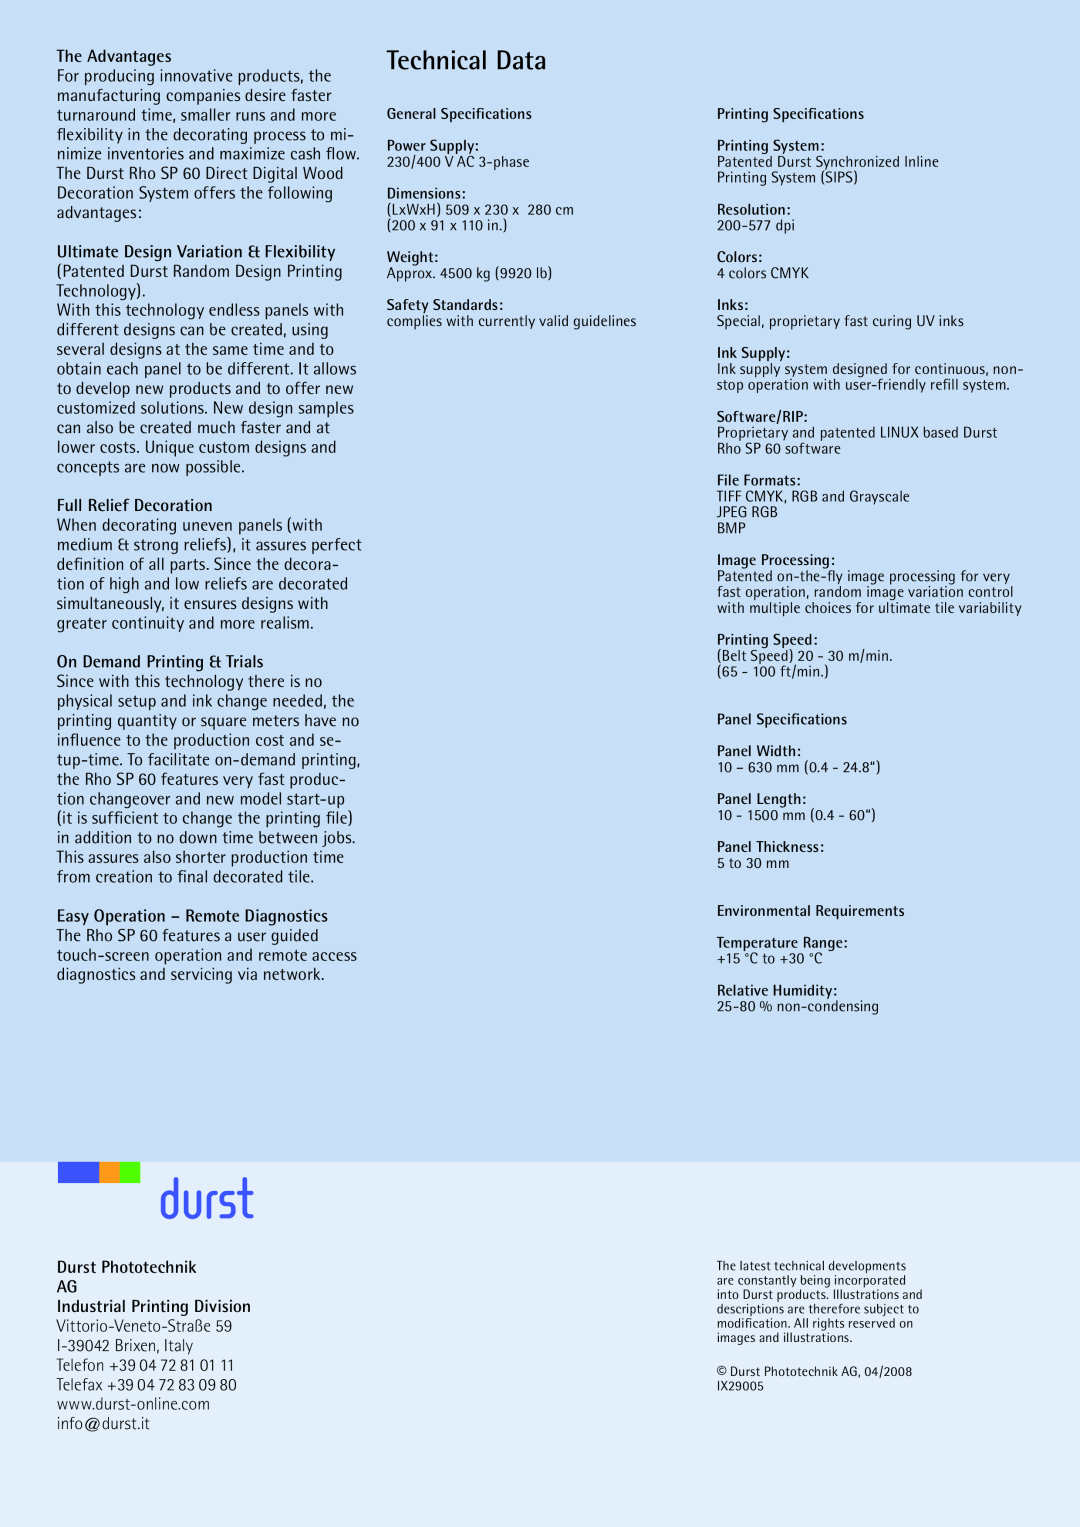 Durst Rho SP 60 The Advantages, Full Relief Decoration, On Demand Printing & Trials, Durst Phototechnik AG, Technical Data 